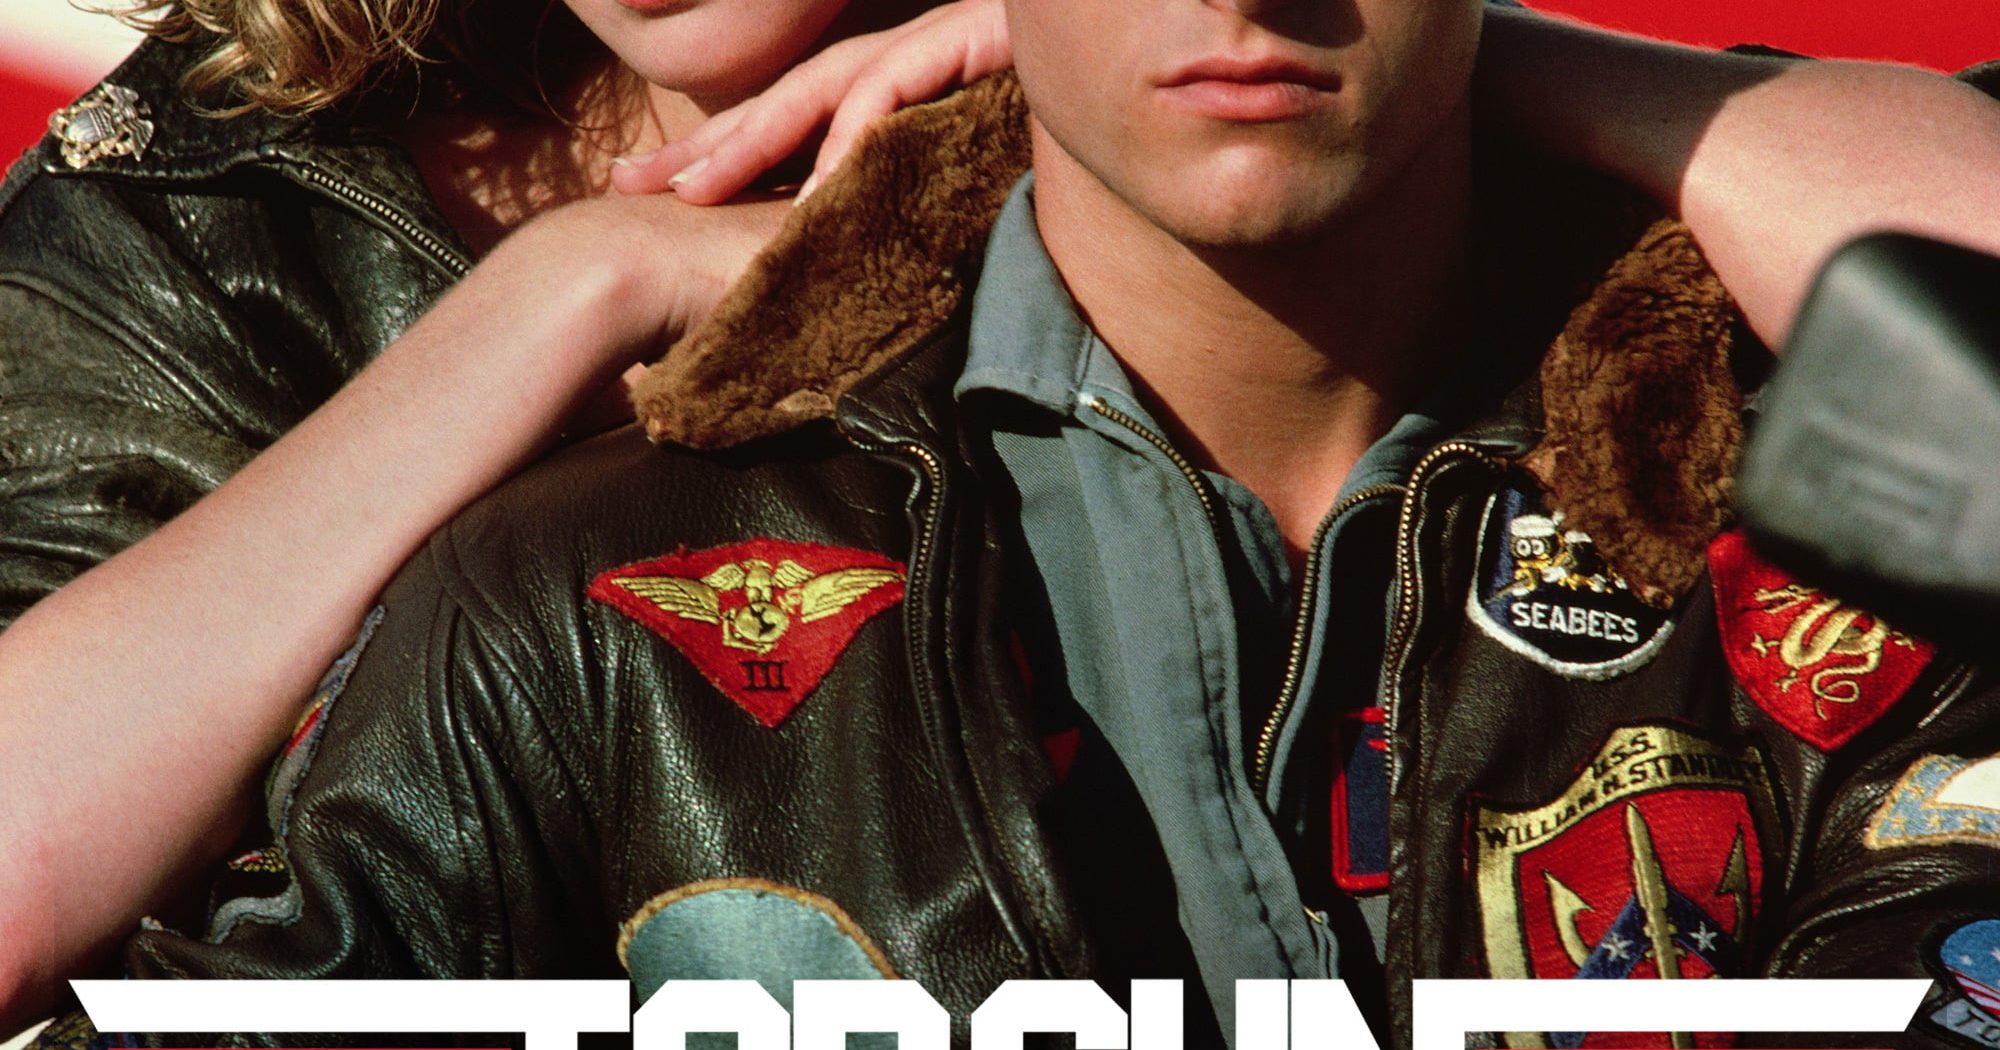 Poster for the movie "Top Gun"